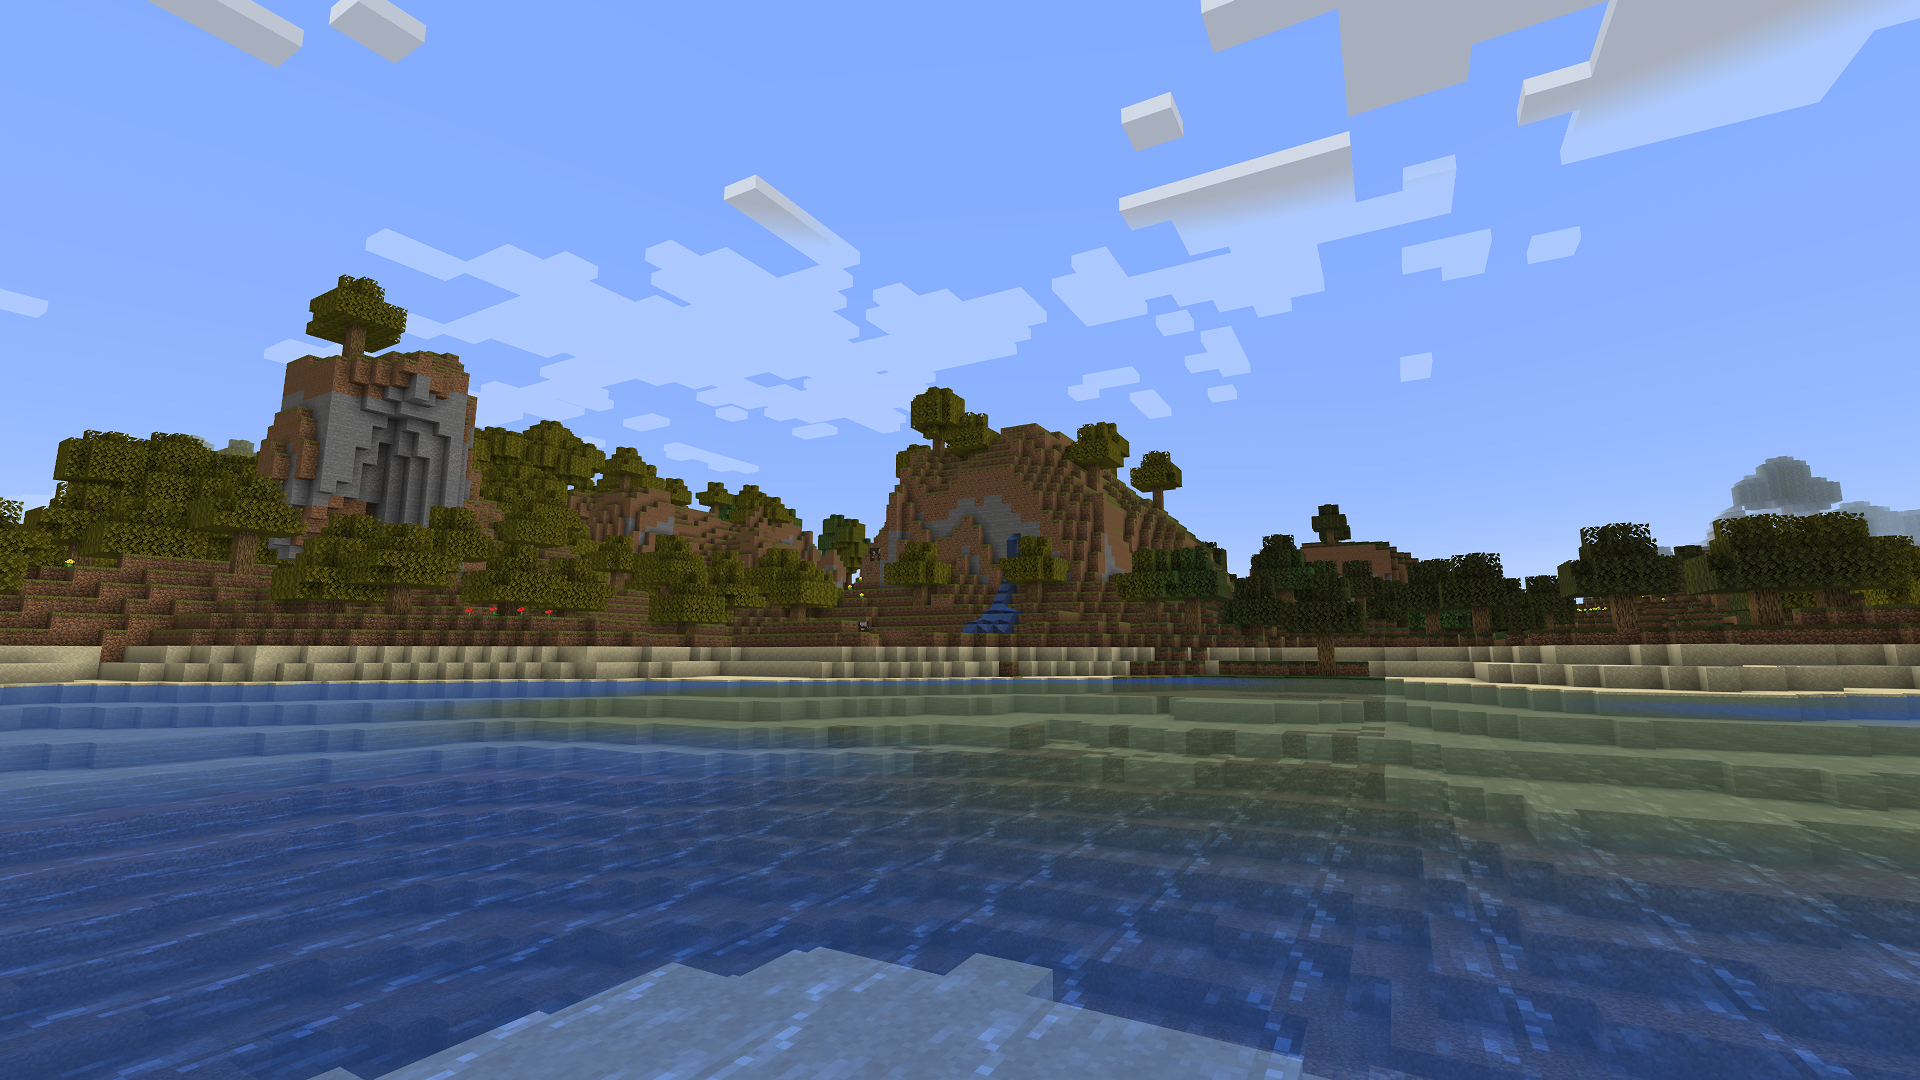 The pack.png world on 1.19.3 with this shaderpack